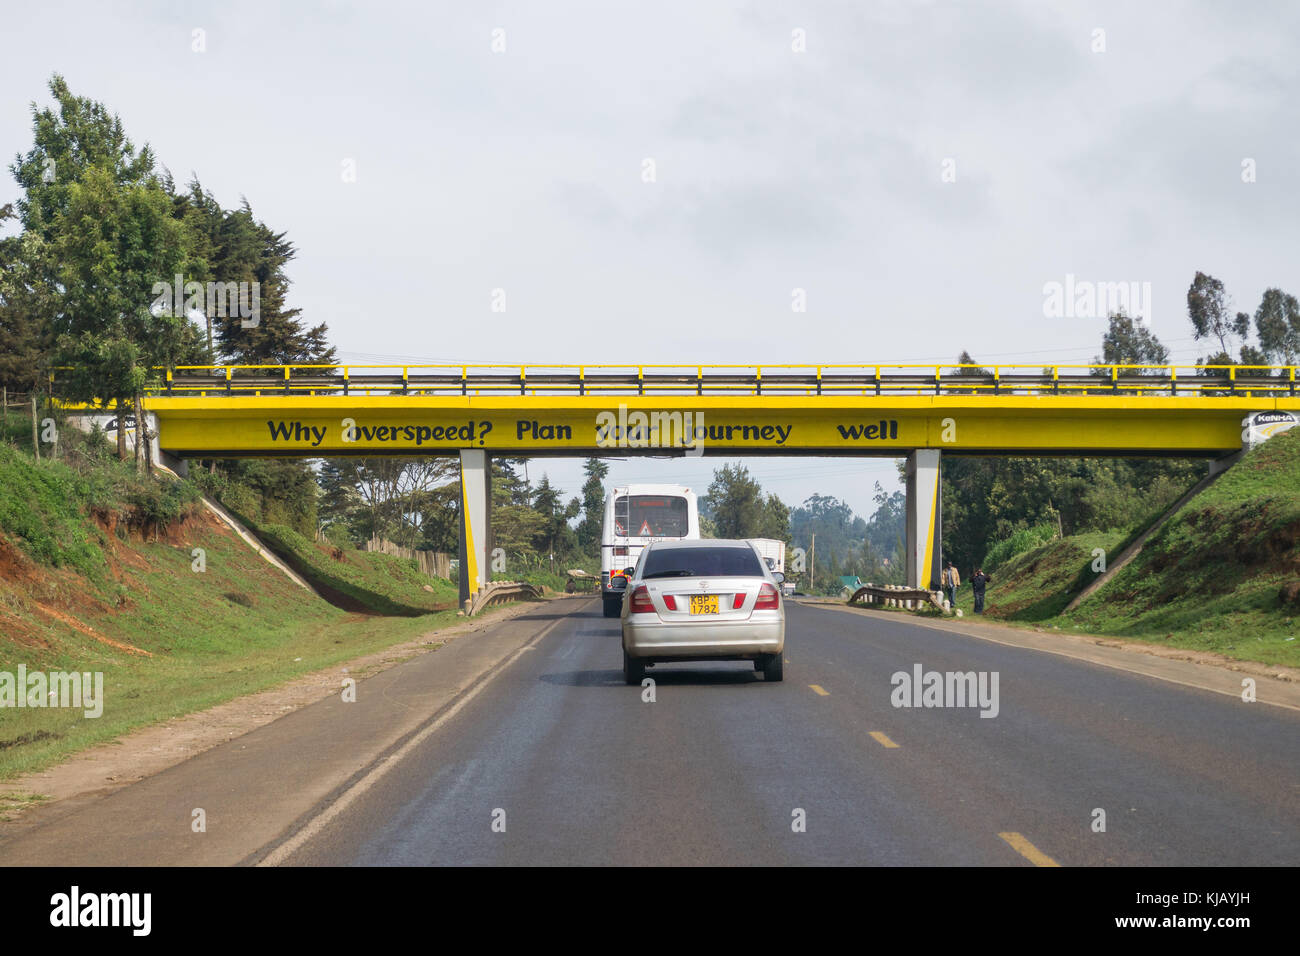 Cars and vehicles pass under a bridge with advice on speeding written on it, Kenya, East Africa Stock Photo